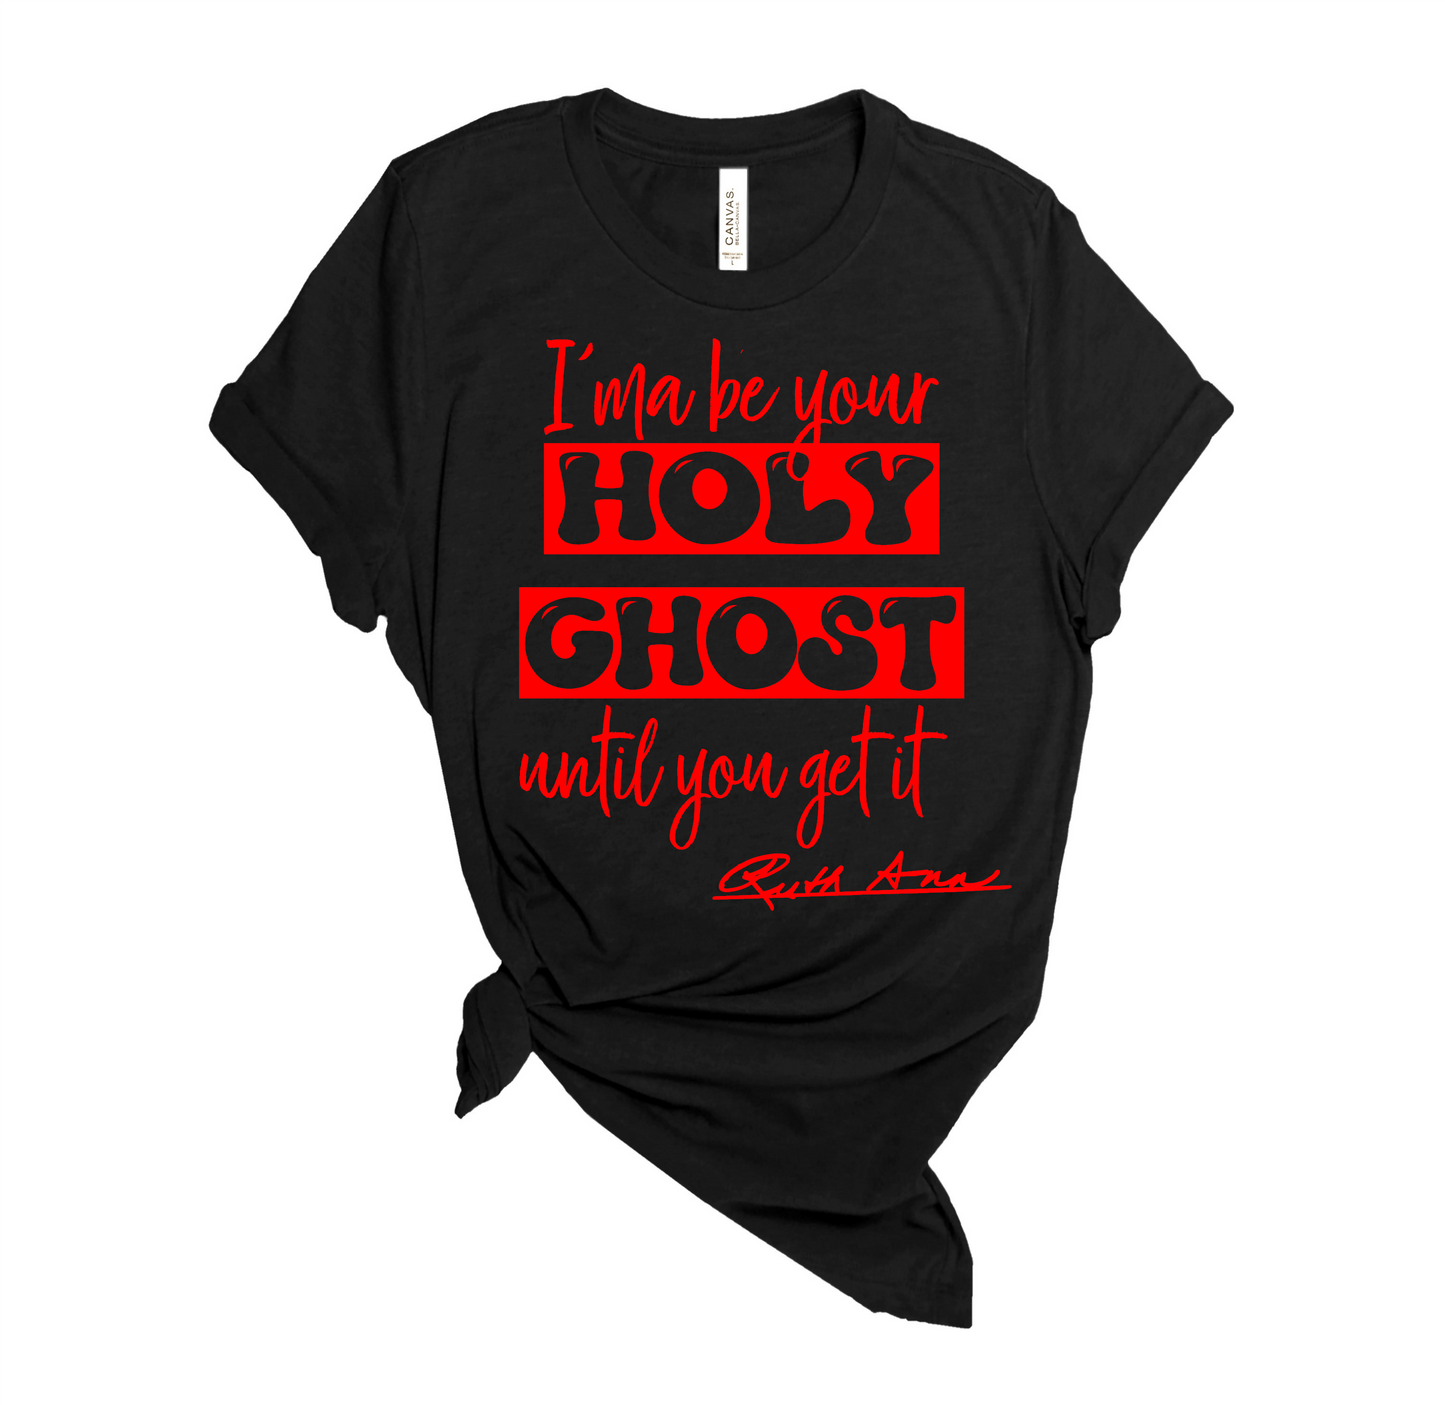 "MAMA SAID" - I'MA BE YOUR HOLY GHOST TIL YOU GET IT - DESIGN 2